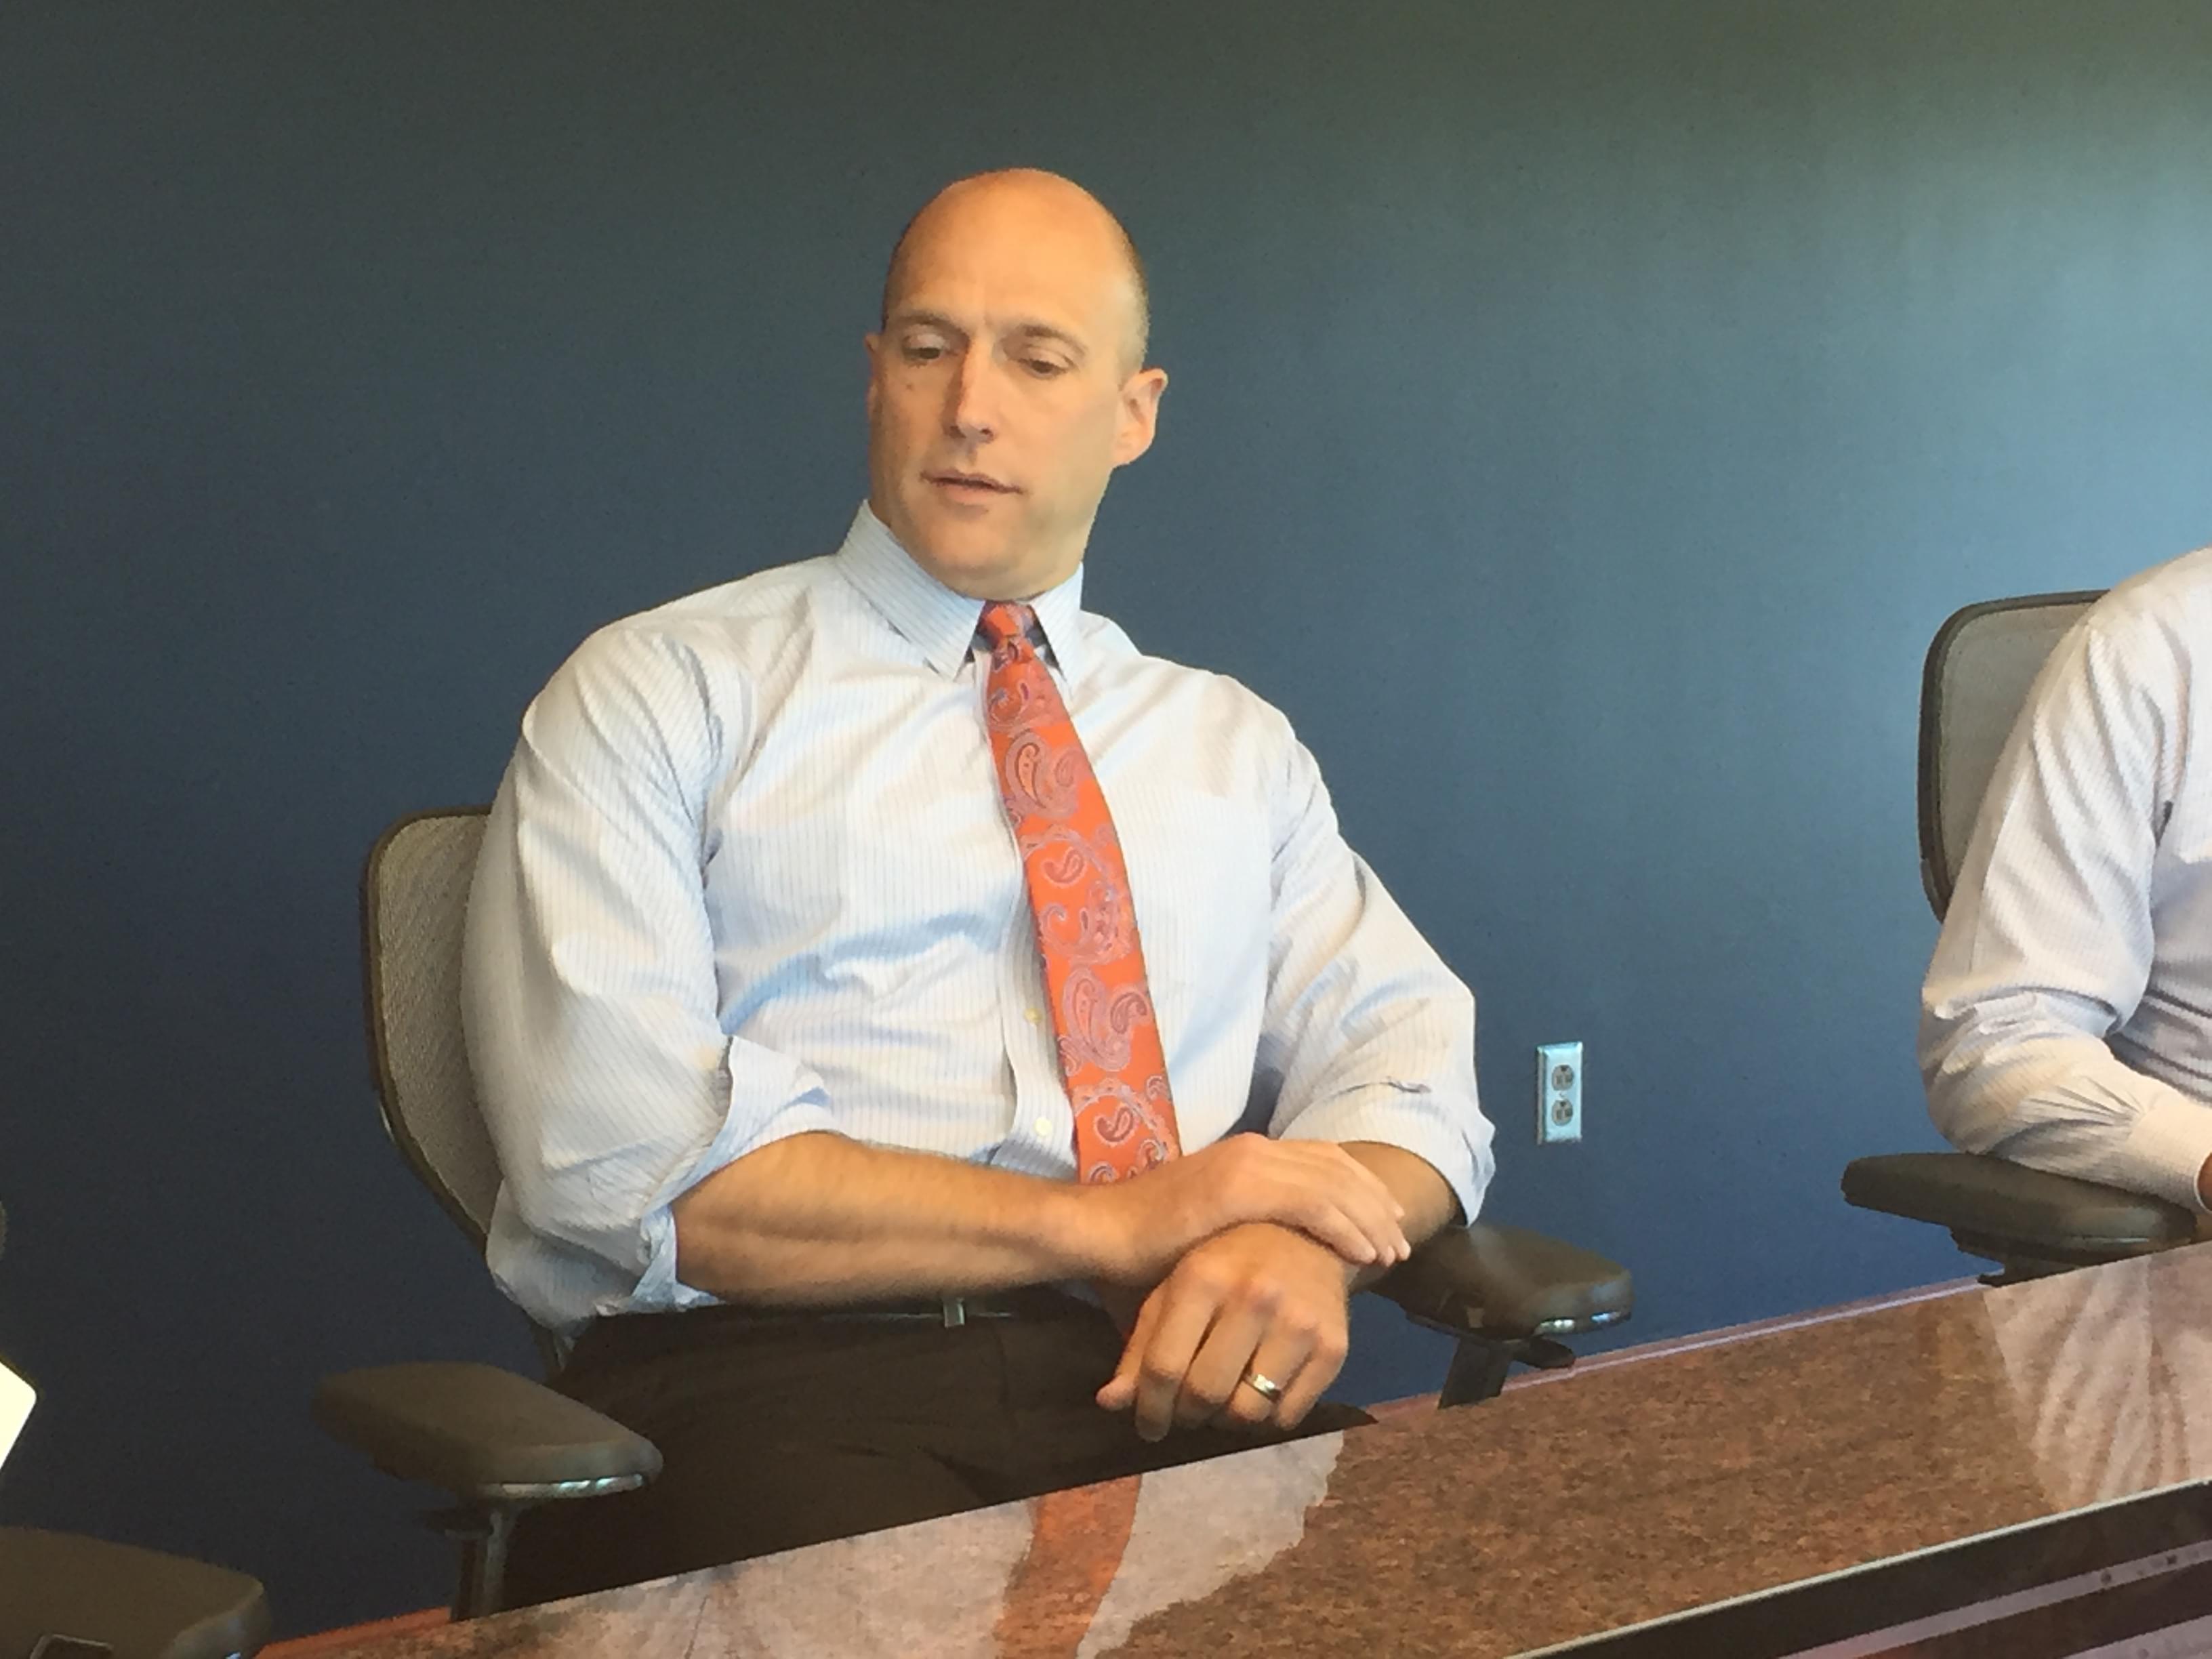 University of Illinois Athletic Director Josh Whitman talks with reporters Tuesday at the Bielfeldt Athletics Administration Building in Champaign.